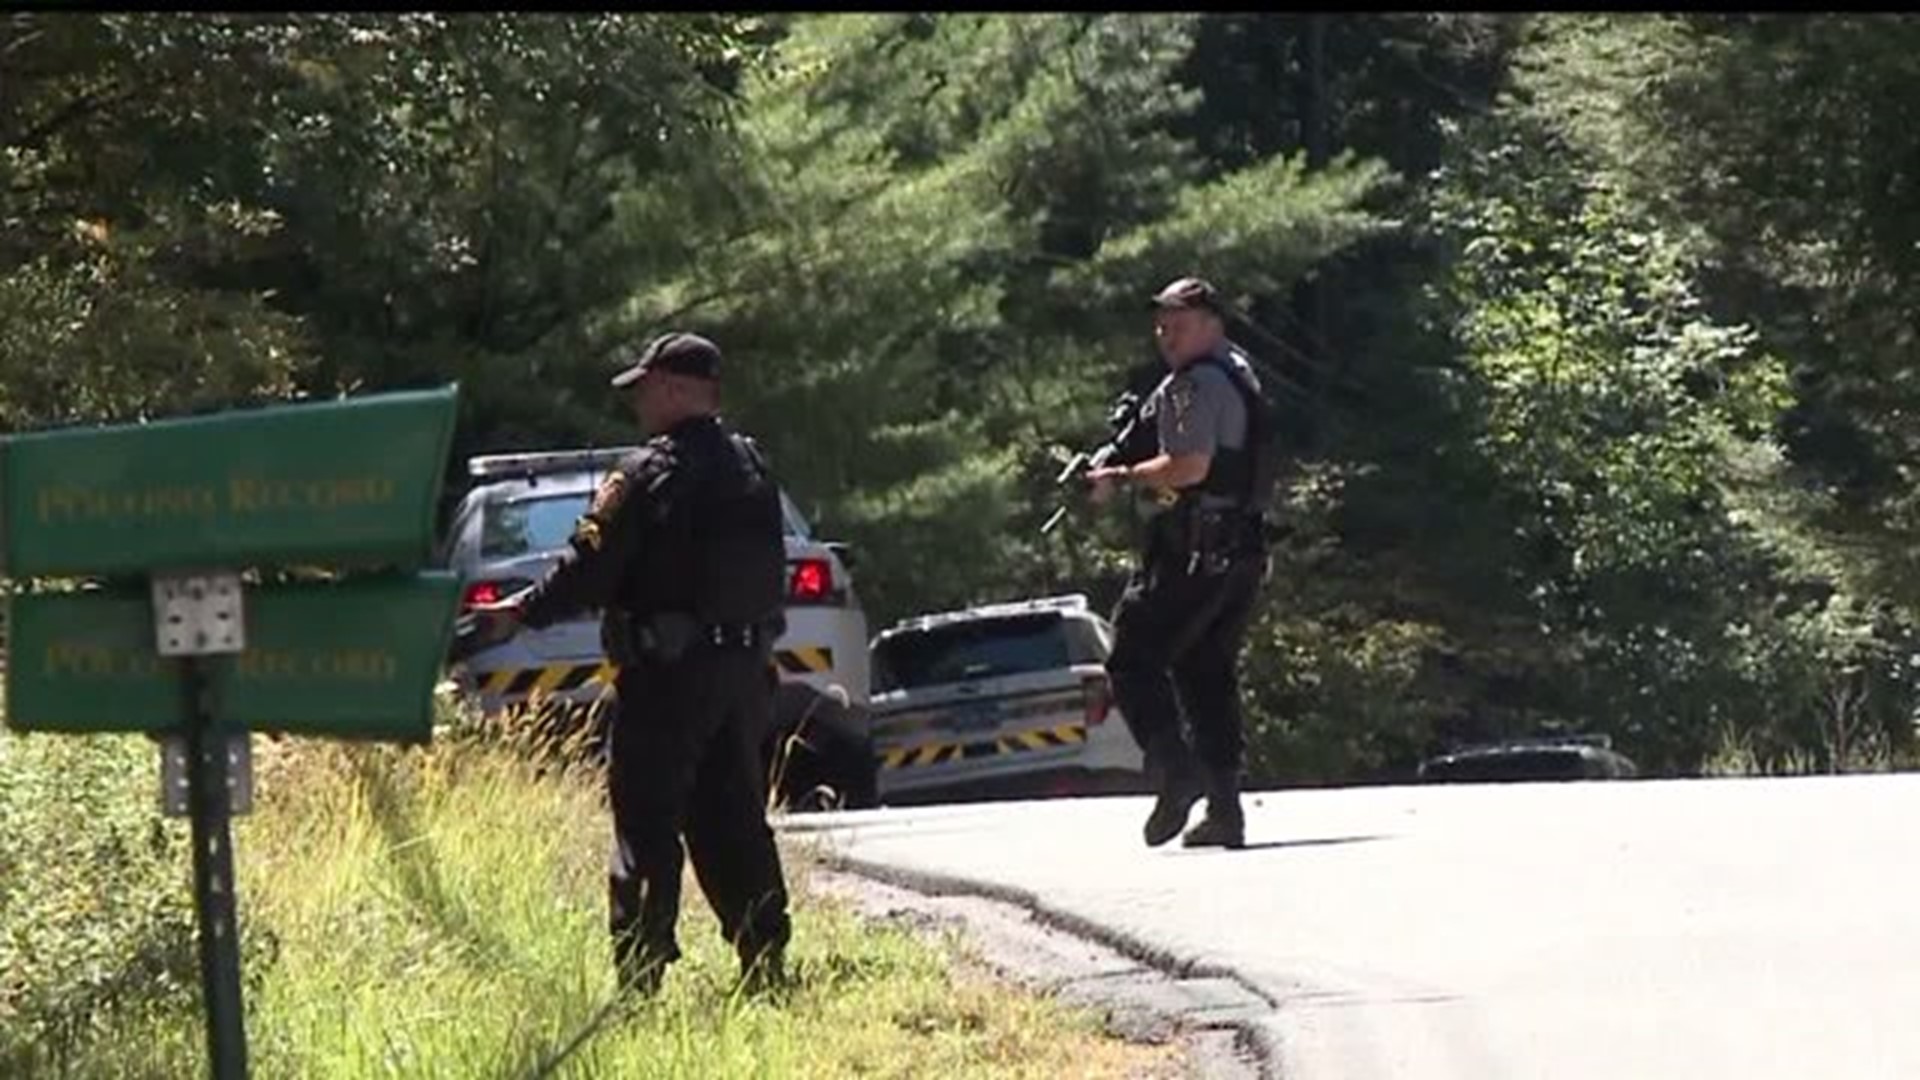 Search for accused cop killer Eric Frein enters week 3